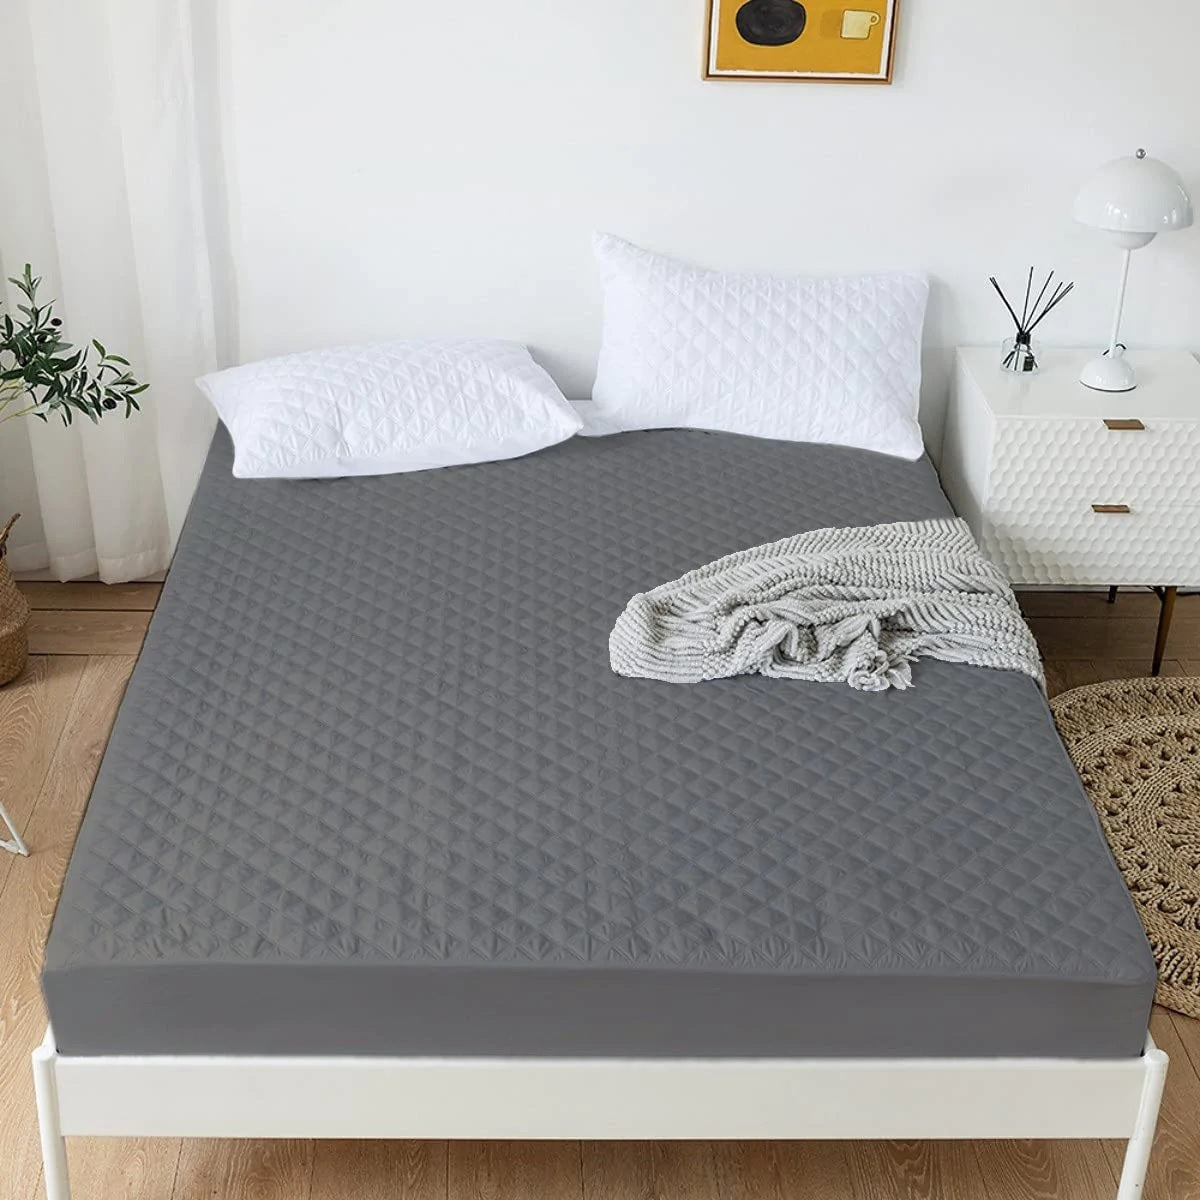 Quilted Fitted Waterproof Mattress Protector - Grey (Single Size)